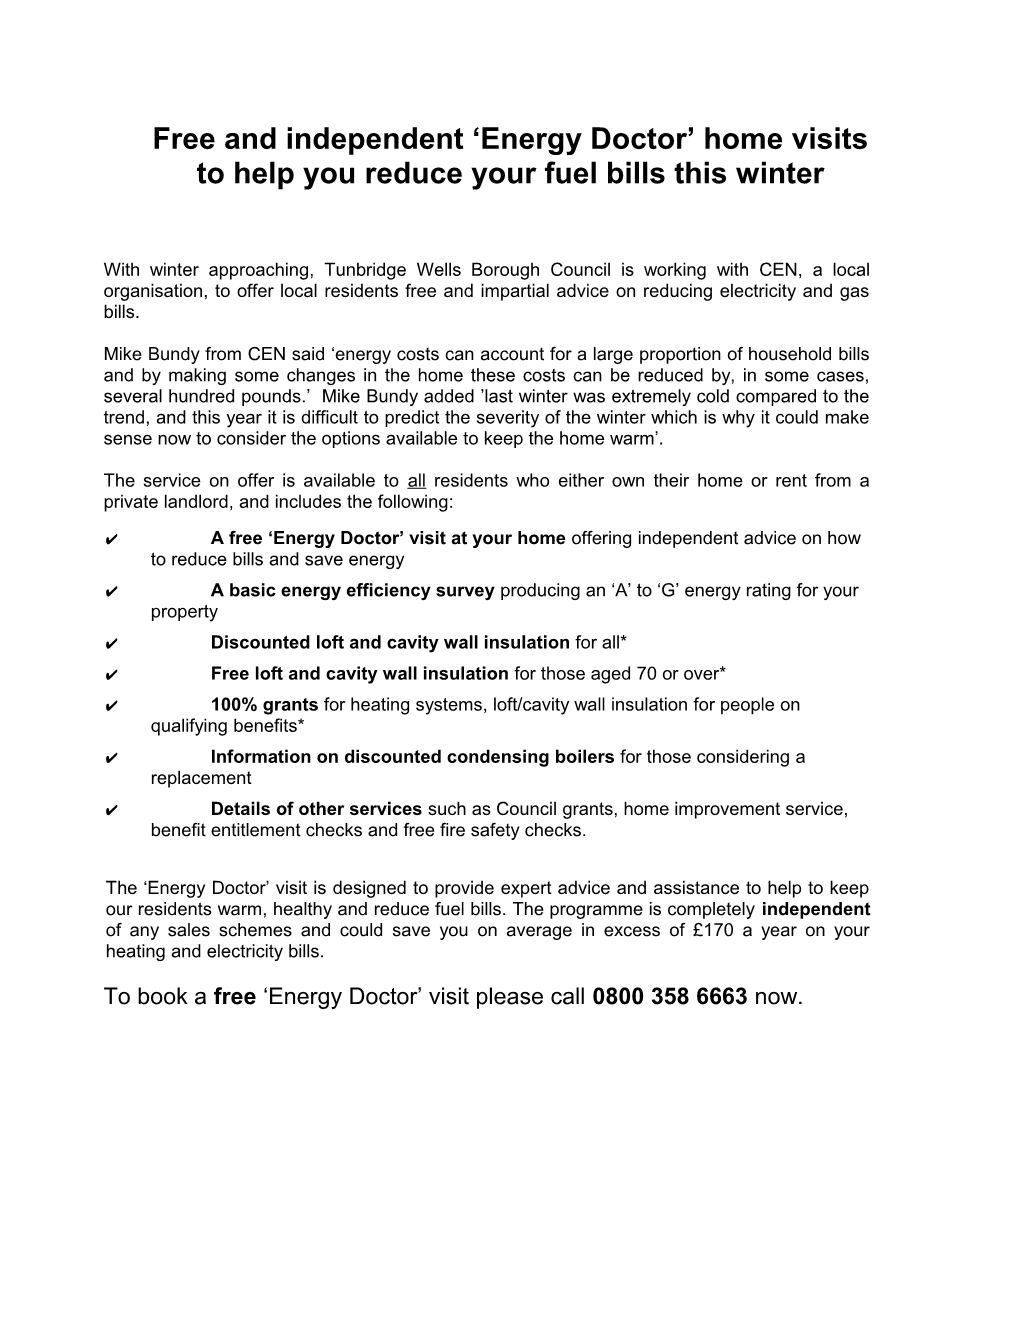 Free and Independent Energy Doctor Home Visit to Help You Reduce Your Fuel Bills This Winter